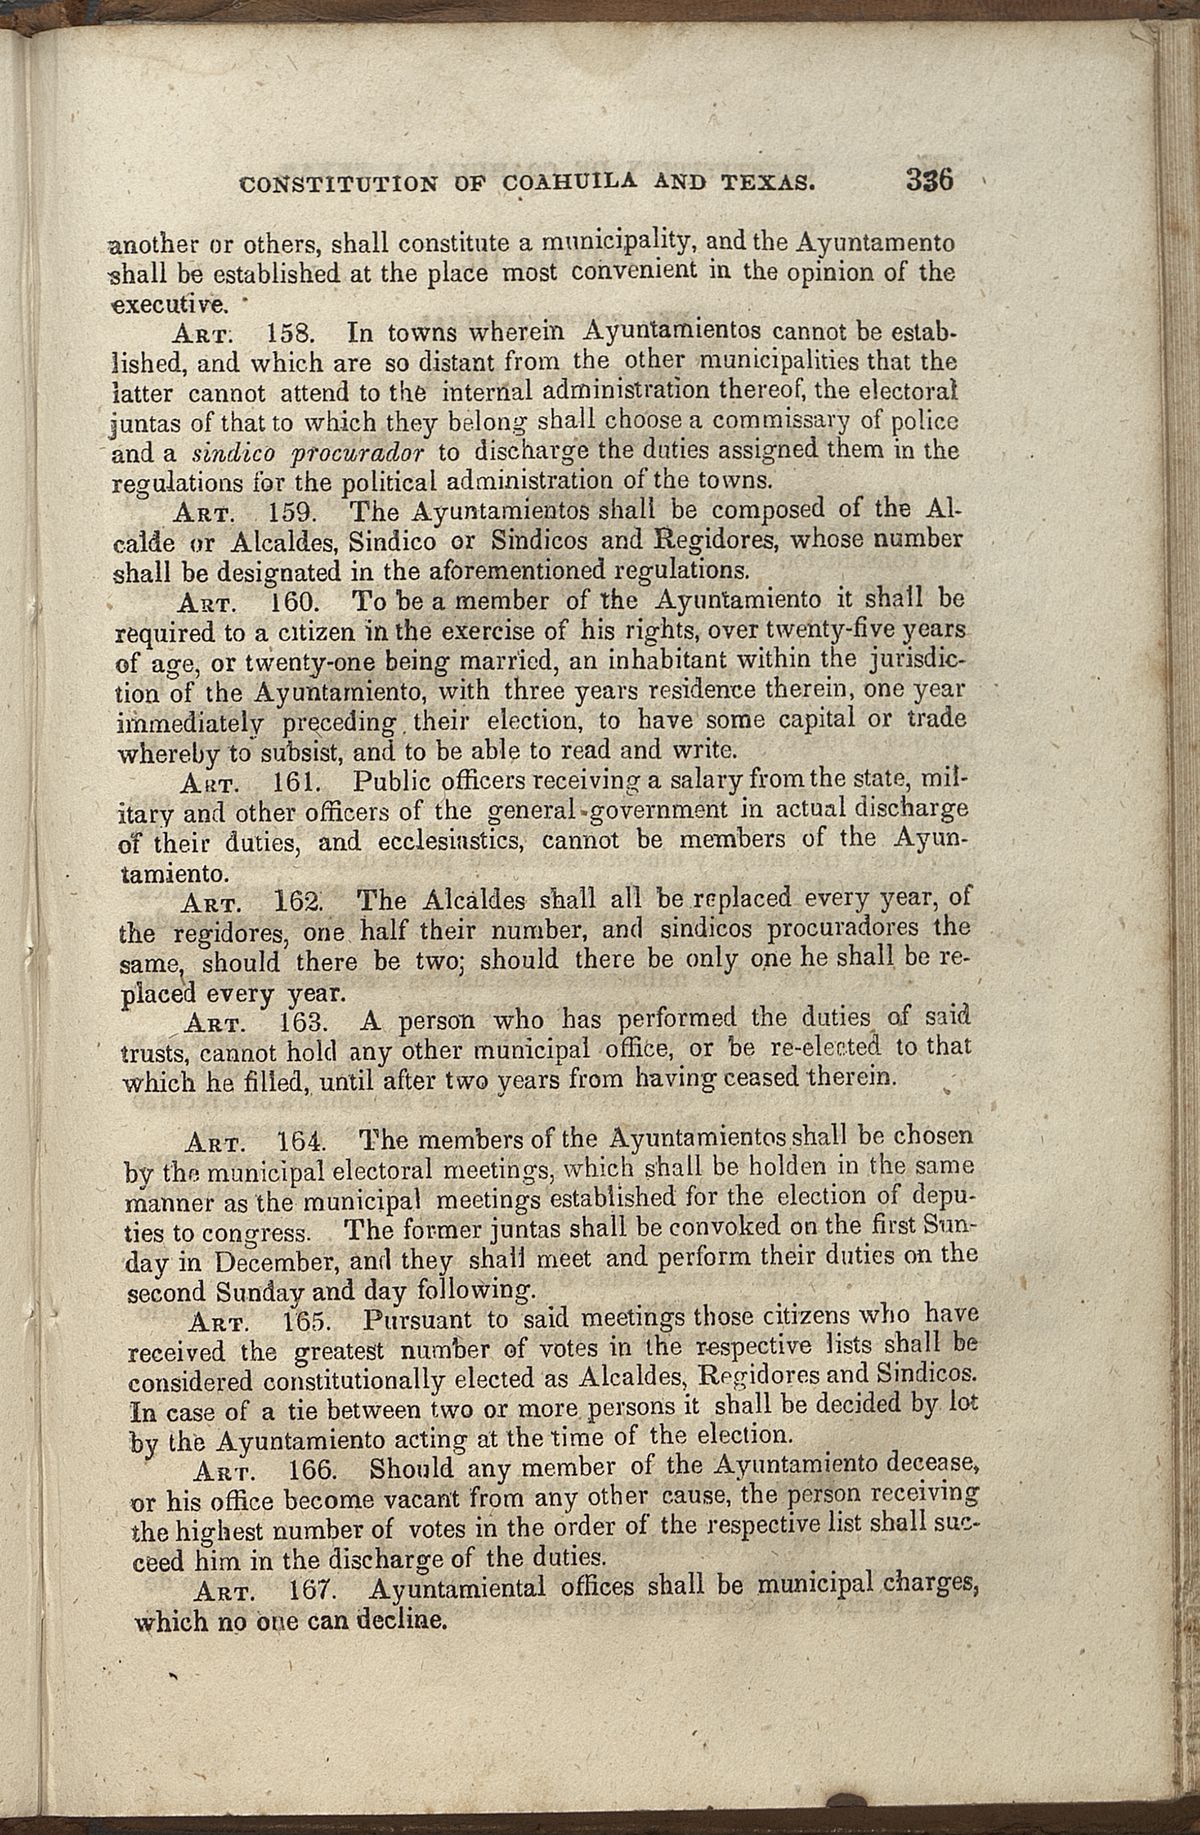 Title III, Section VII, Article 157-167